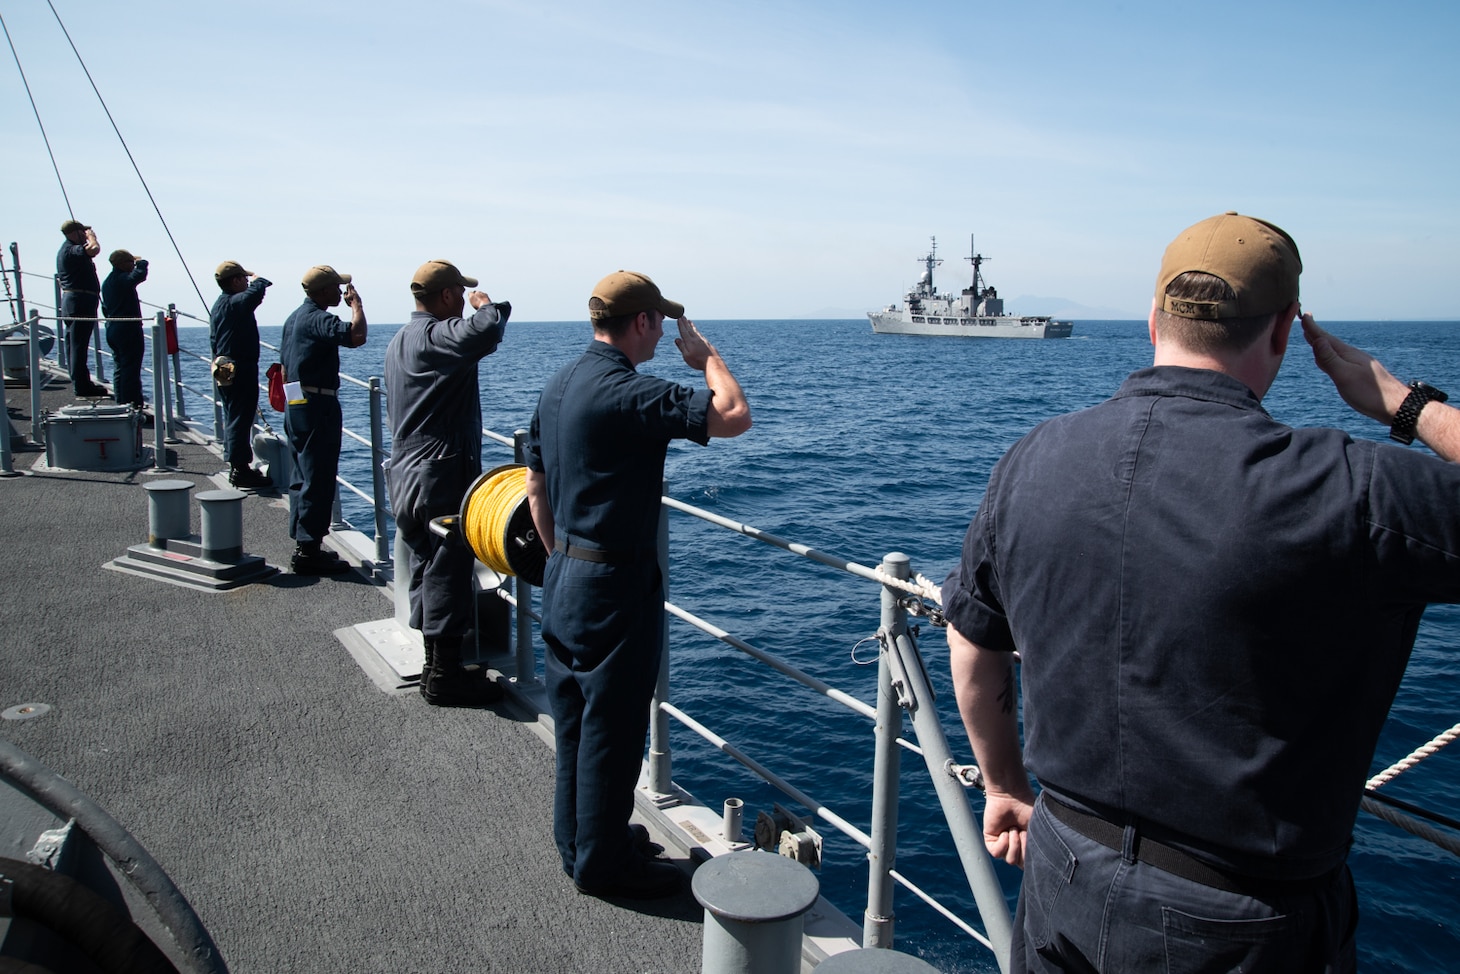 Chief, part of Mine Countermeasures Squadron 7, is operating in the Indo-Pacific region to enhance interoperability with partners and serve as a ready-response platform for contingency operations.